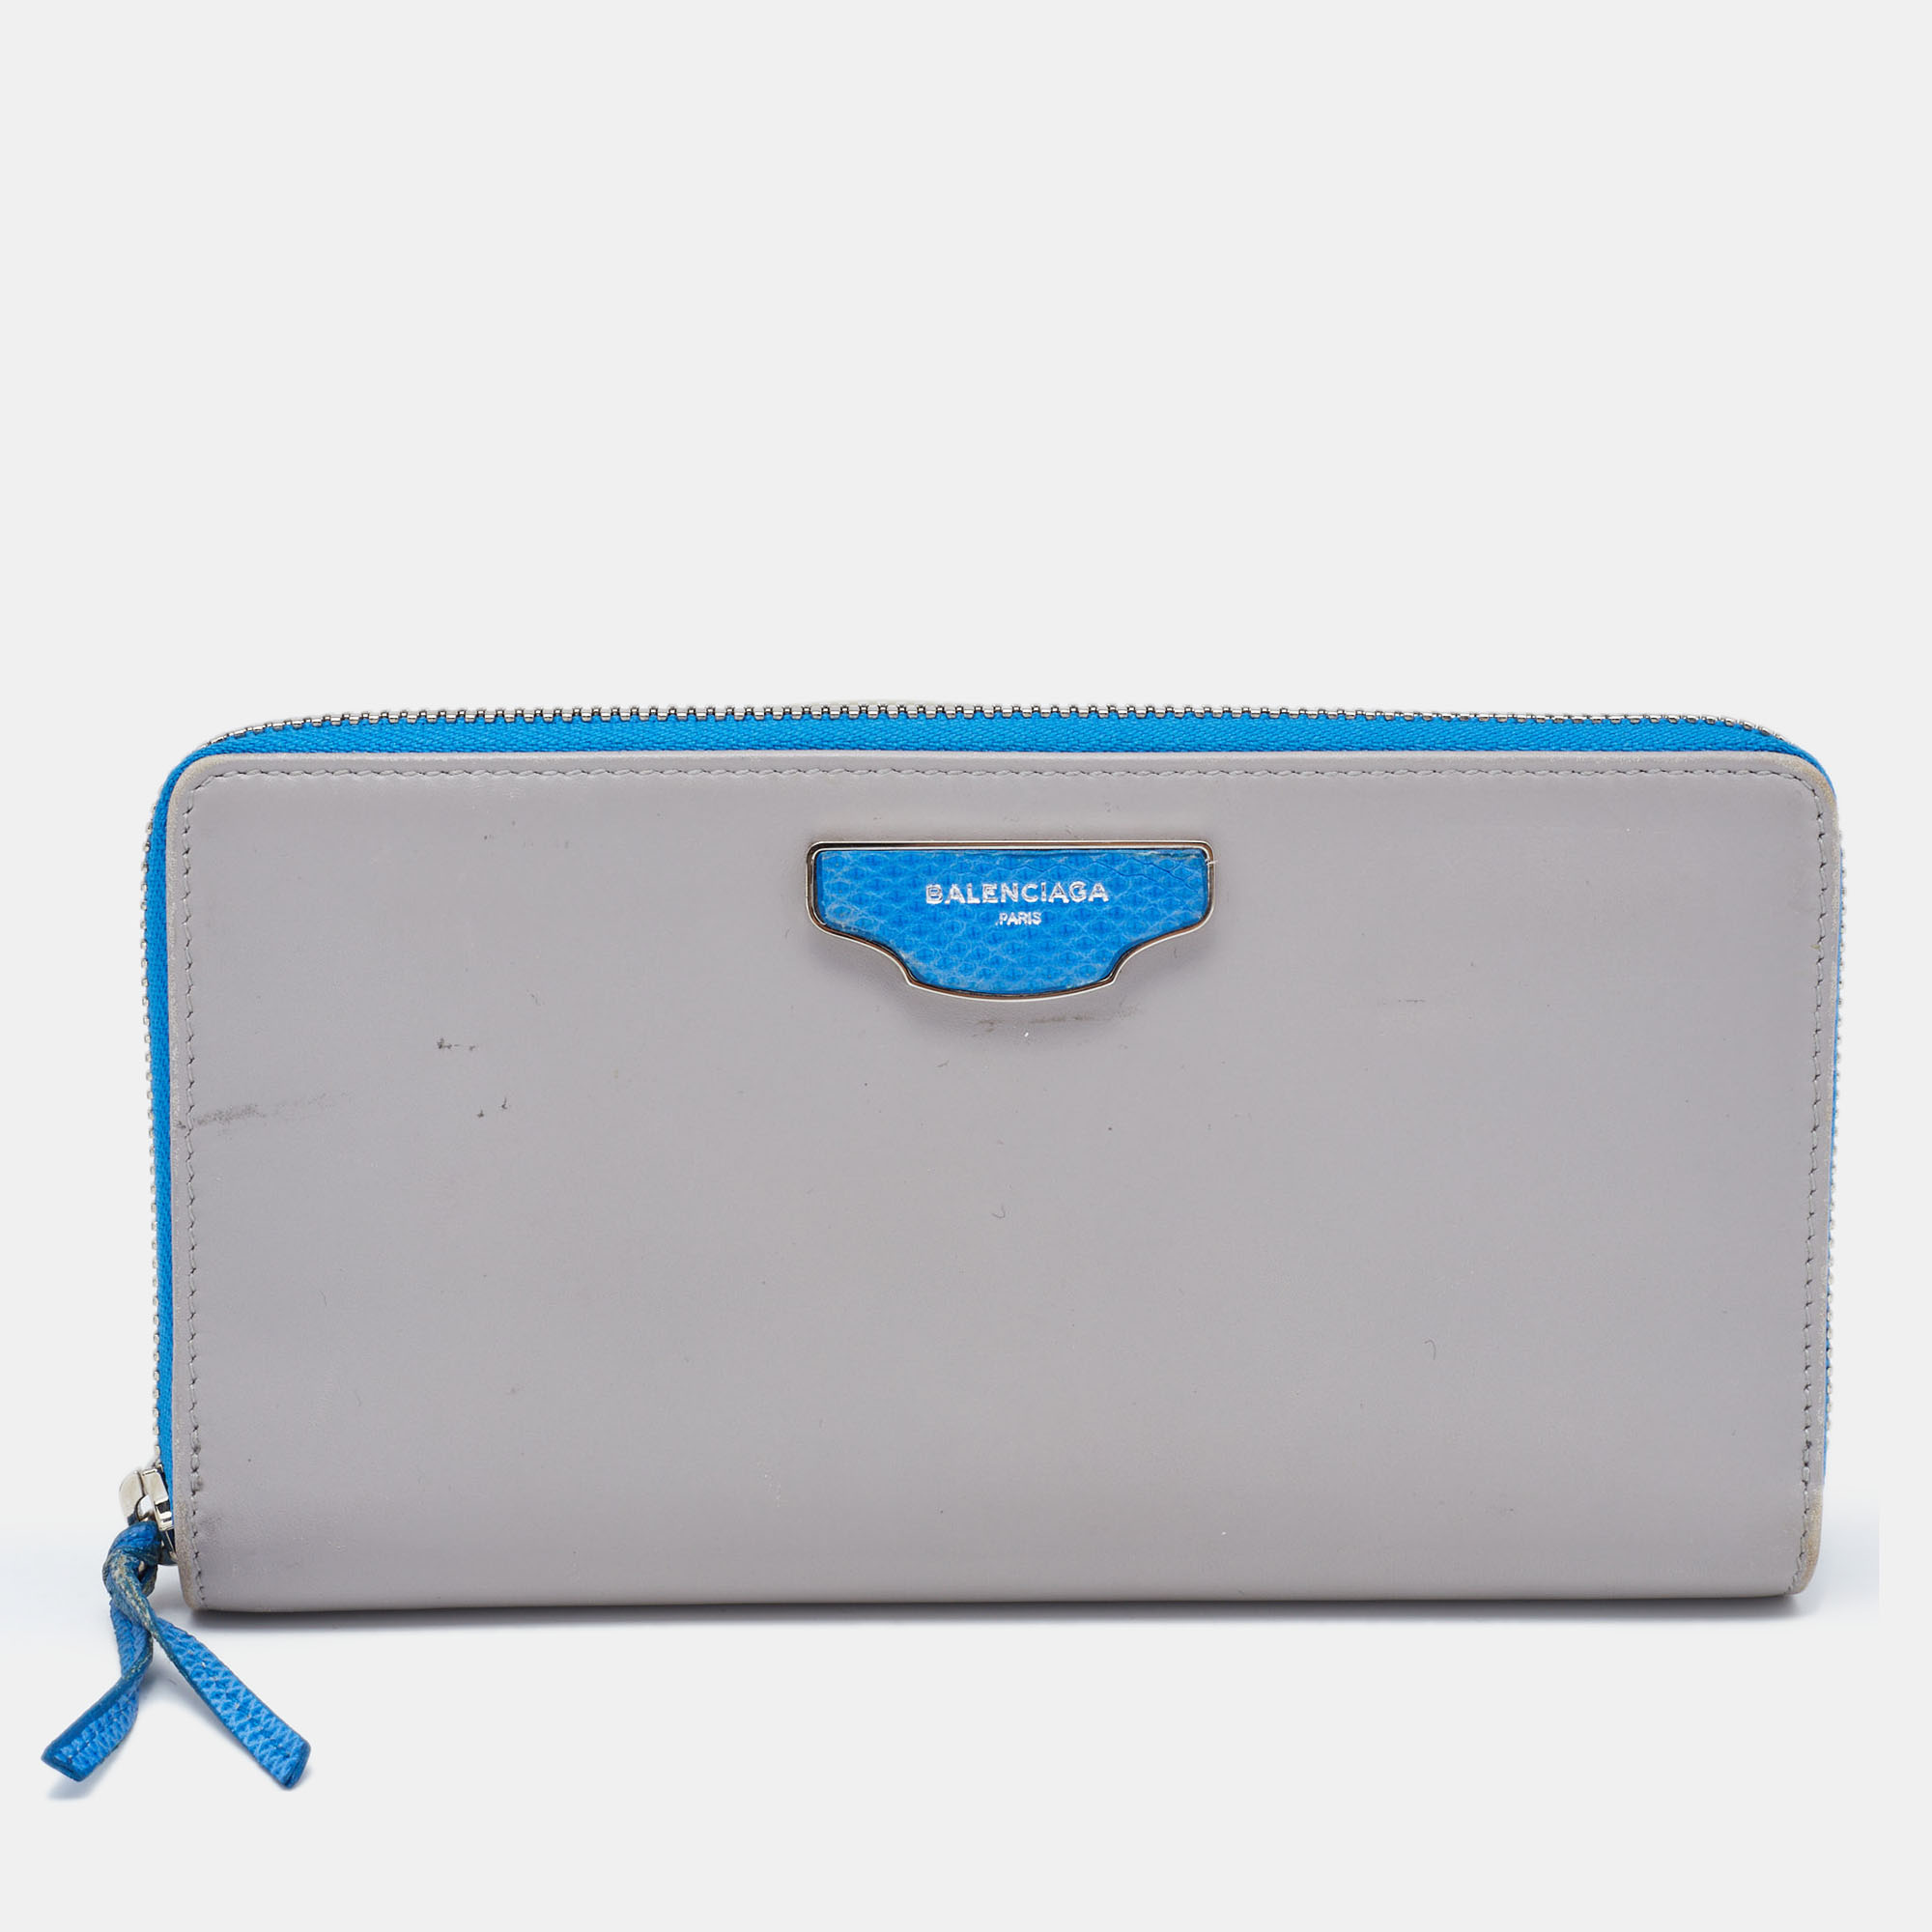 Balenciaga Grey/Blue Leather And Karung Leather Zip Around Wallet